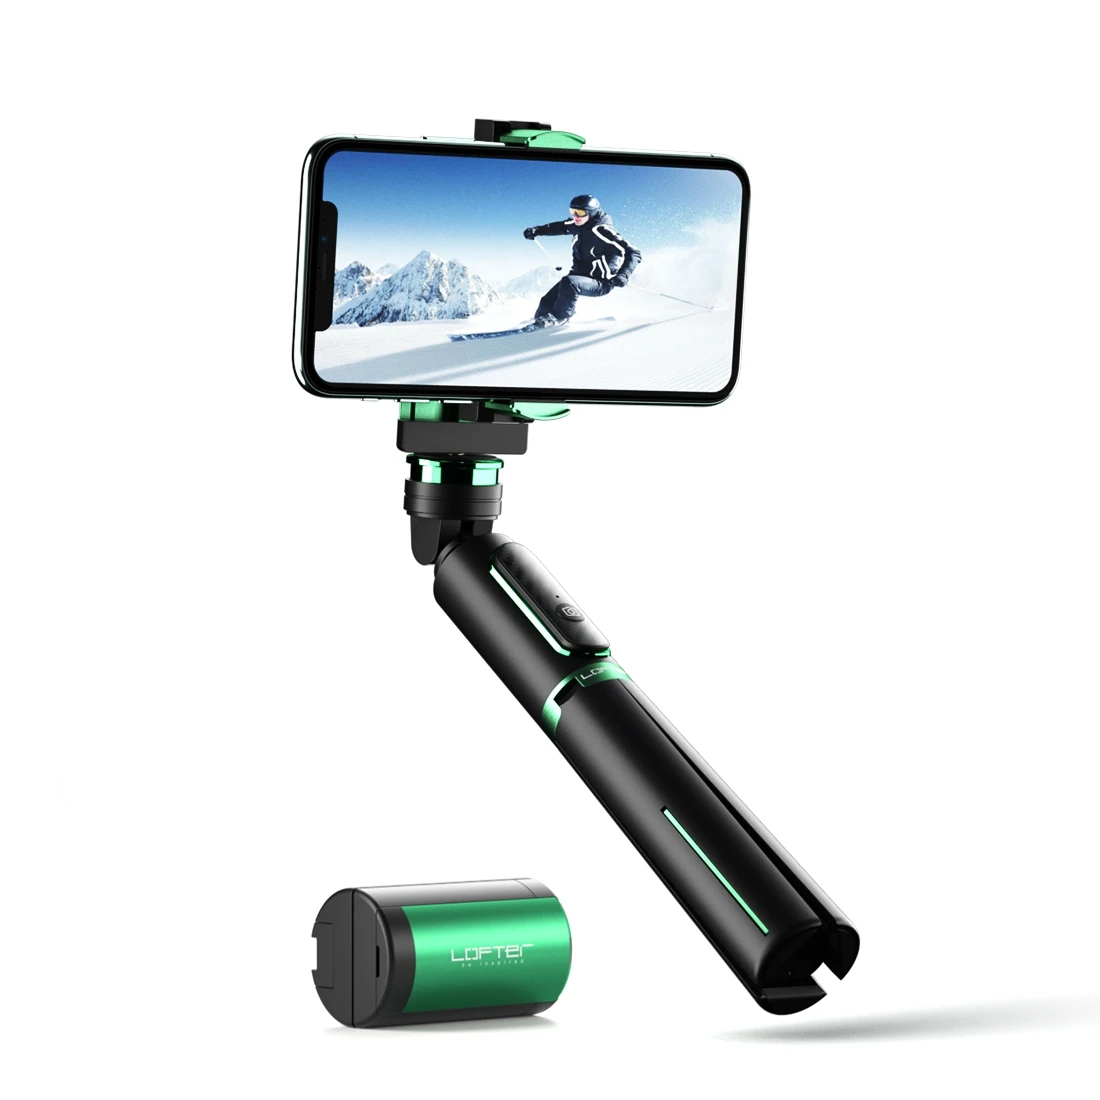 

Professional Stabilizer Photographic Single axis Handheld Smartphone Recording Video Dslr Camera Selfie Stick, Black with green